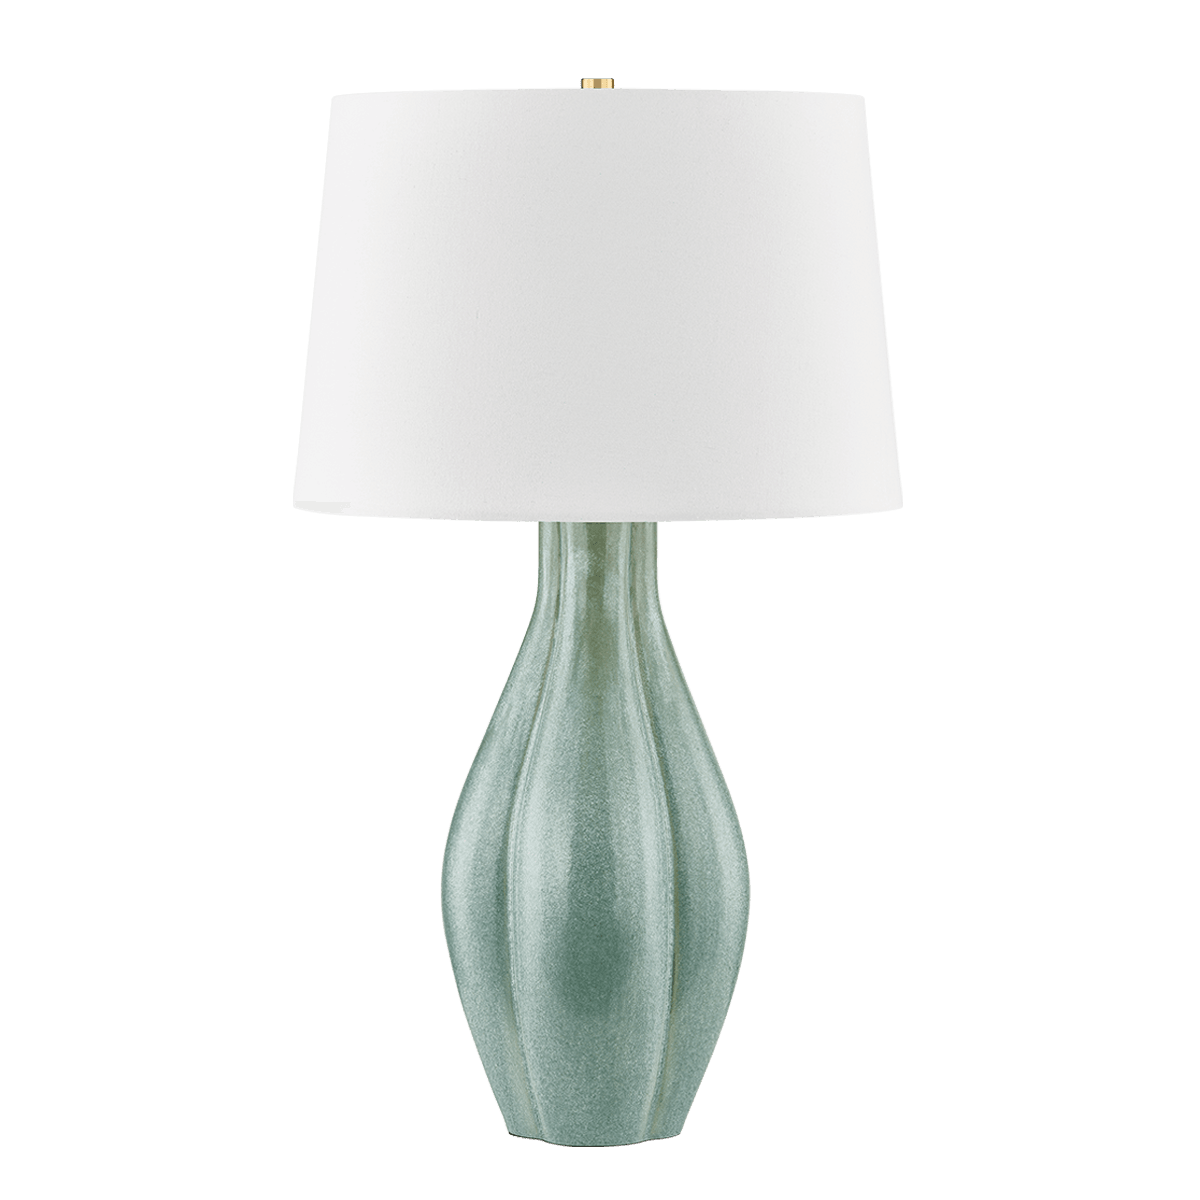 Hudson Valley Lighting - Galloway Table Lamp - L7231-AGB/C09 | Montreal Lighting & Hardware